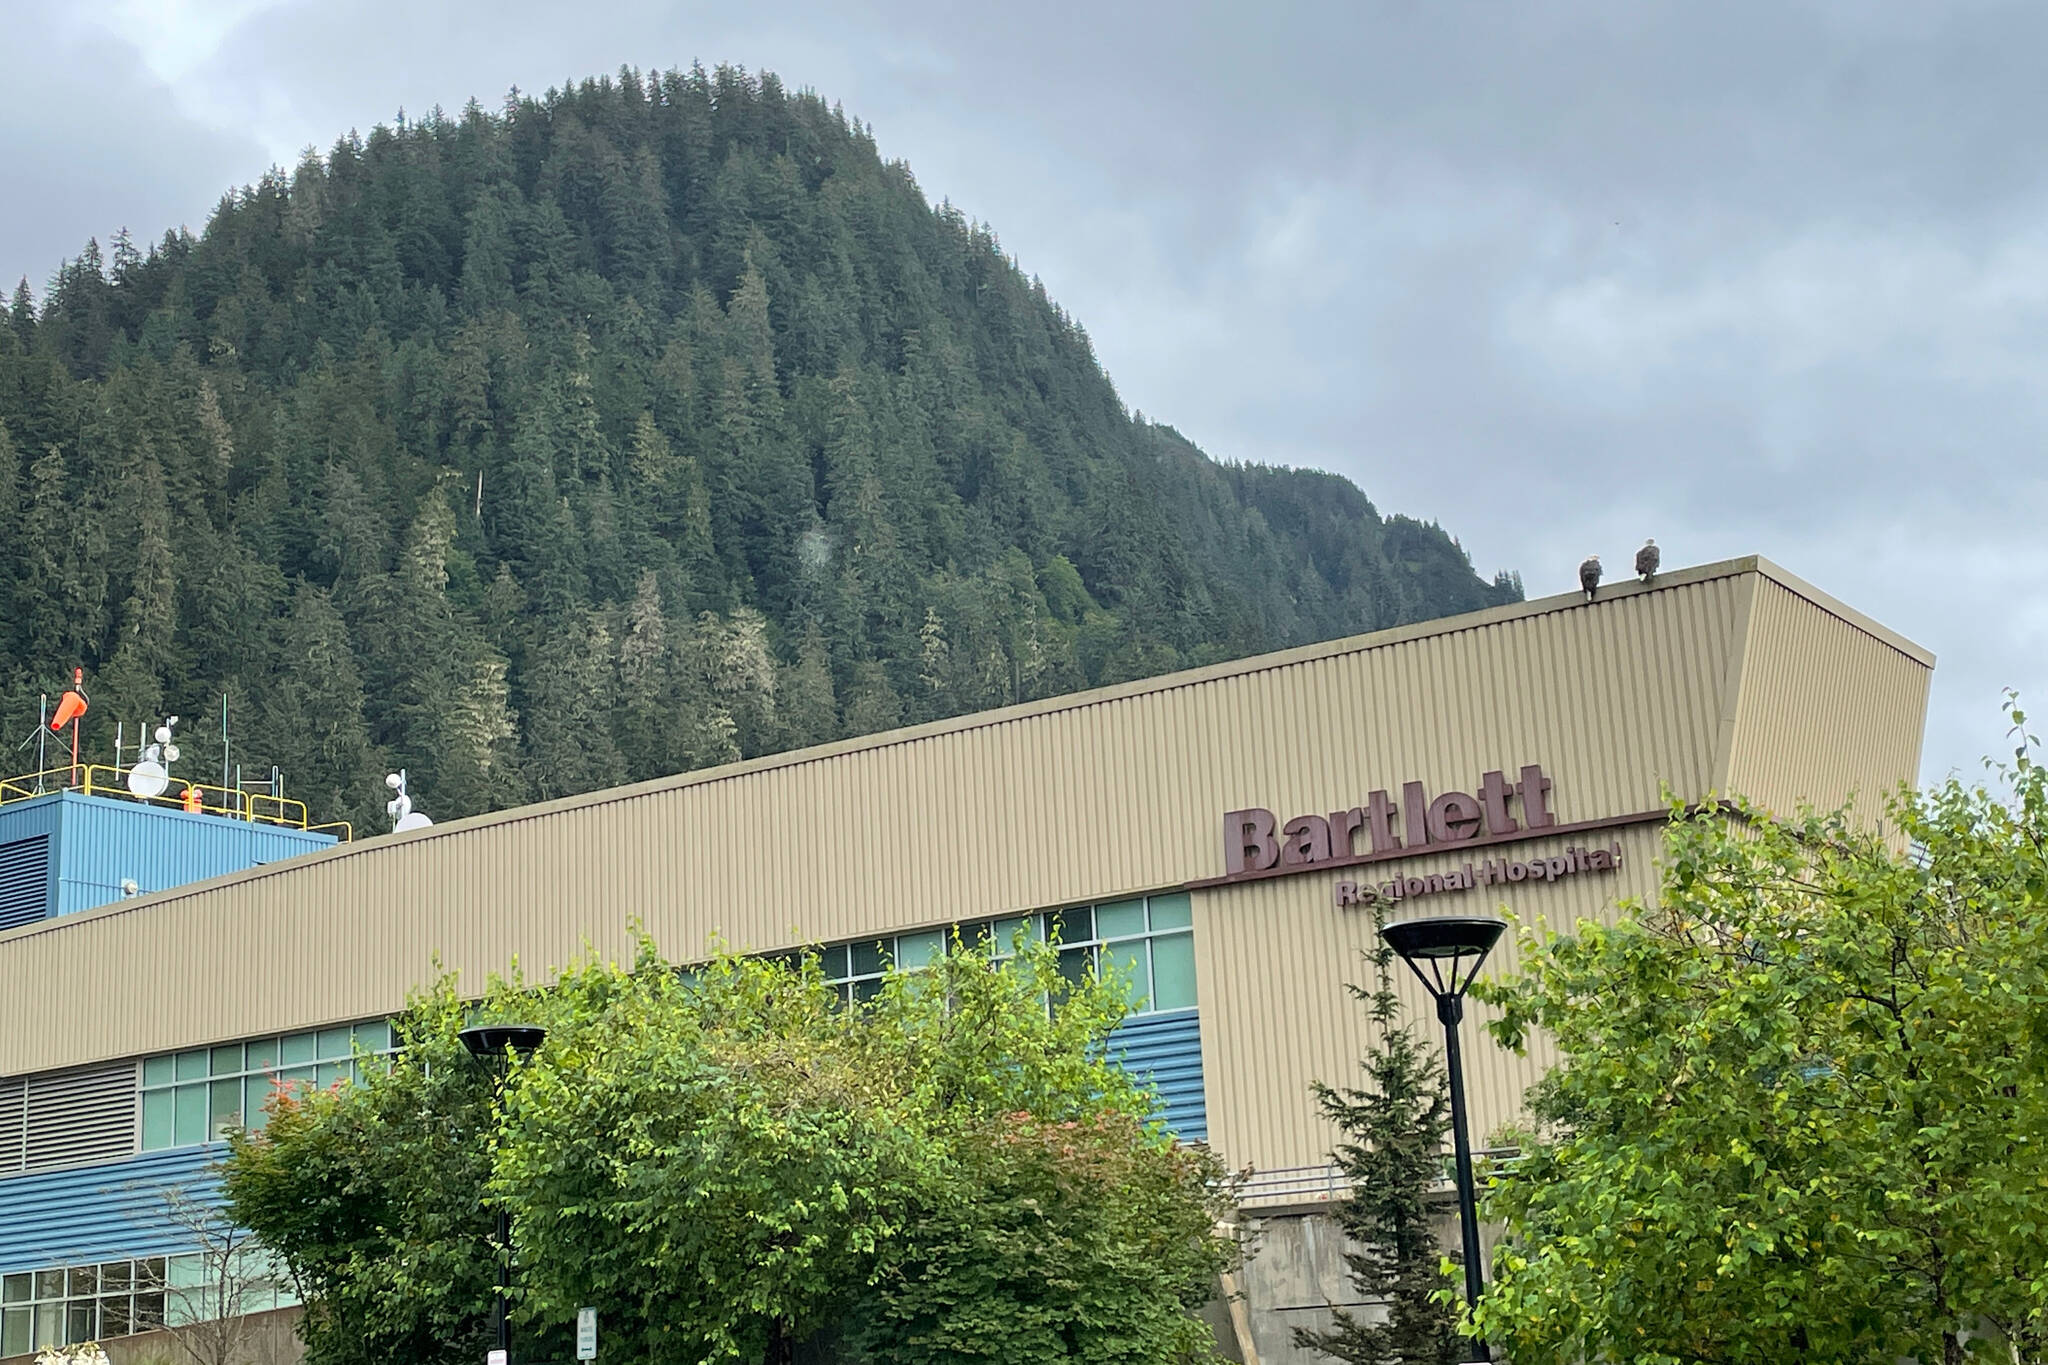 Bartlett Regional Hospital announced a pair of resignations and the appointment of an interim CEO.  (Michael S. Lockett / Juneau Empire)